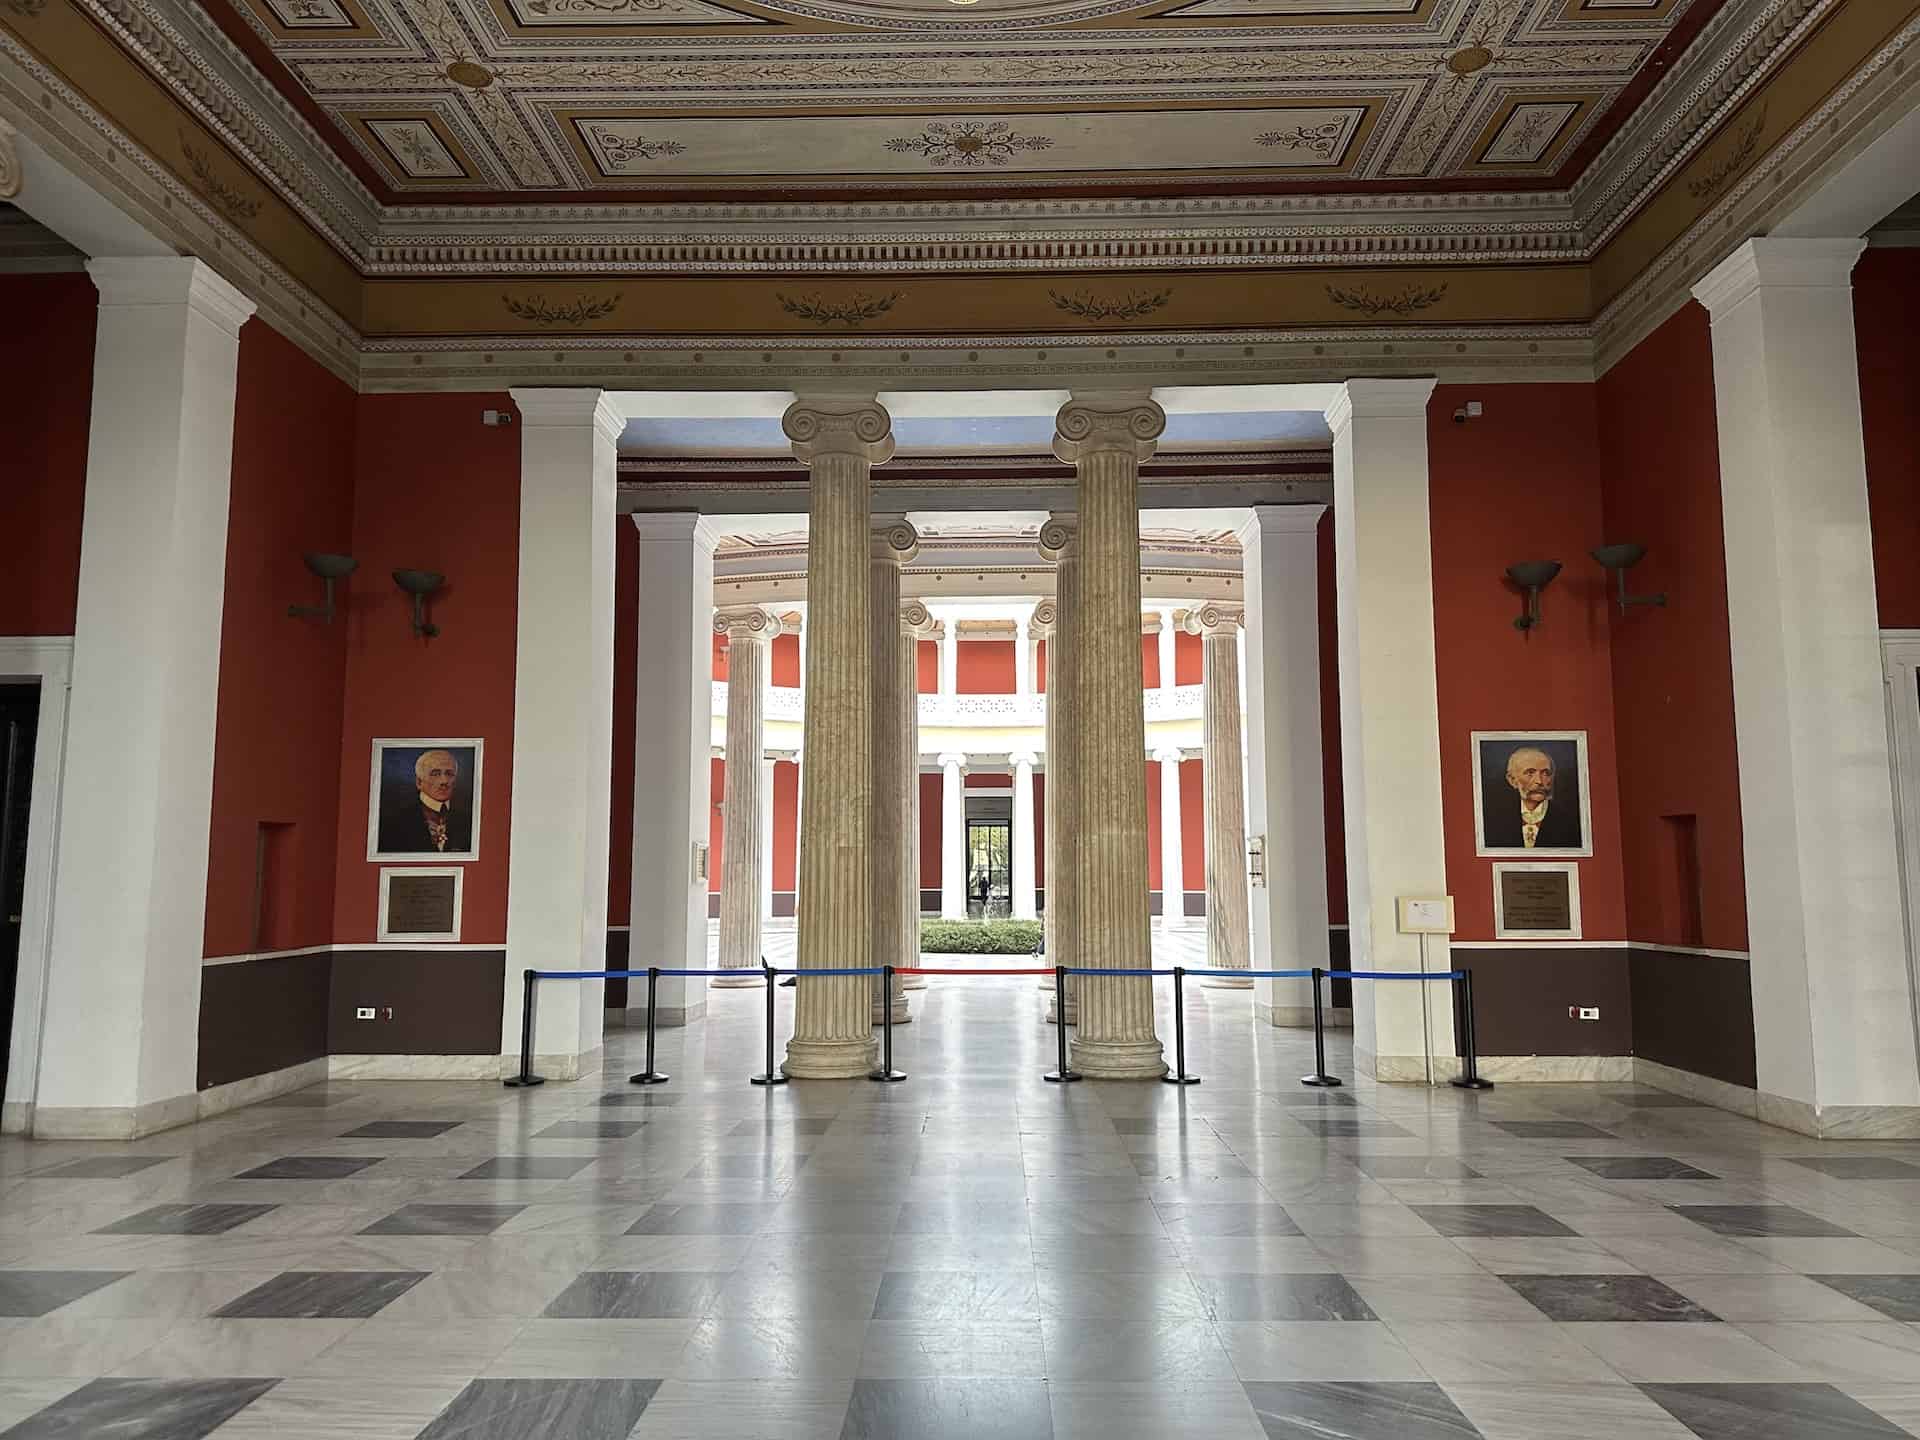 Main foyer at the Zappeion in Athens, Greece